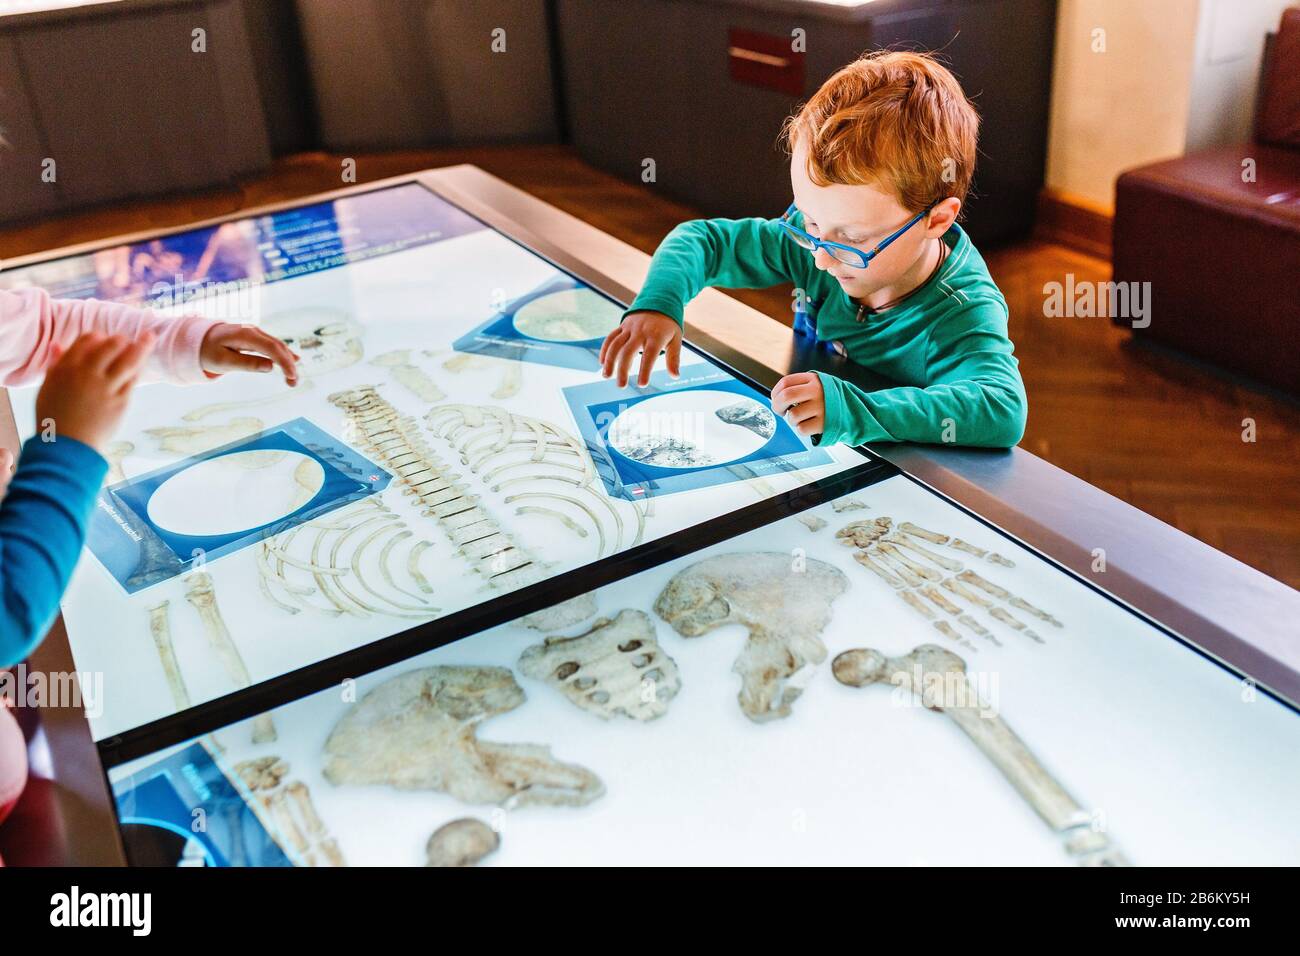 24 MARCH 2017, VIENNA, MUSEUM OF NATURAL HISTORY, AUSTRIA: Little red boy prodigy and geek study human anatomy using an interactive computer board Stock Photo